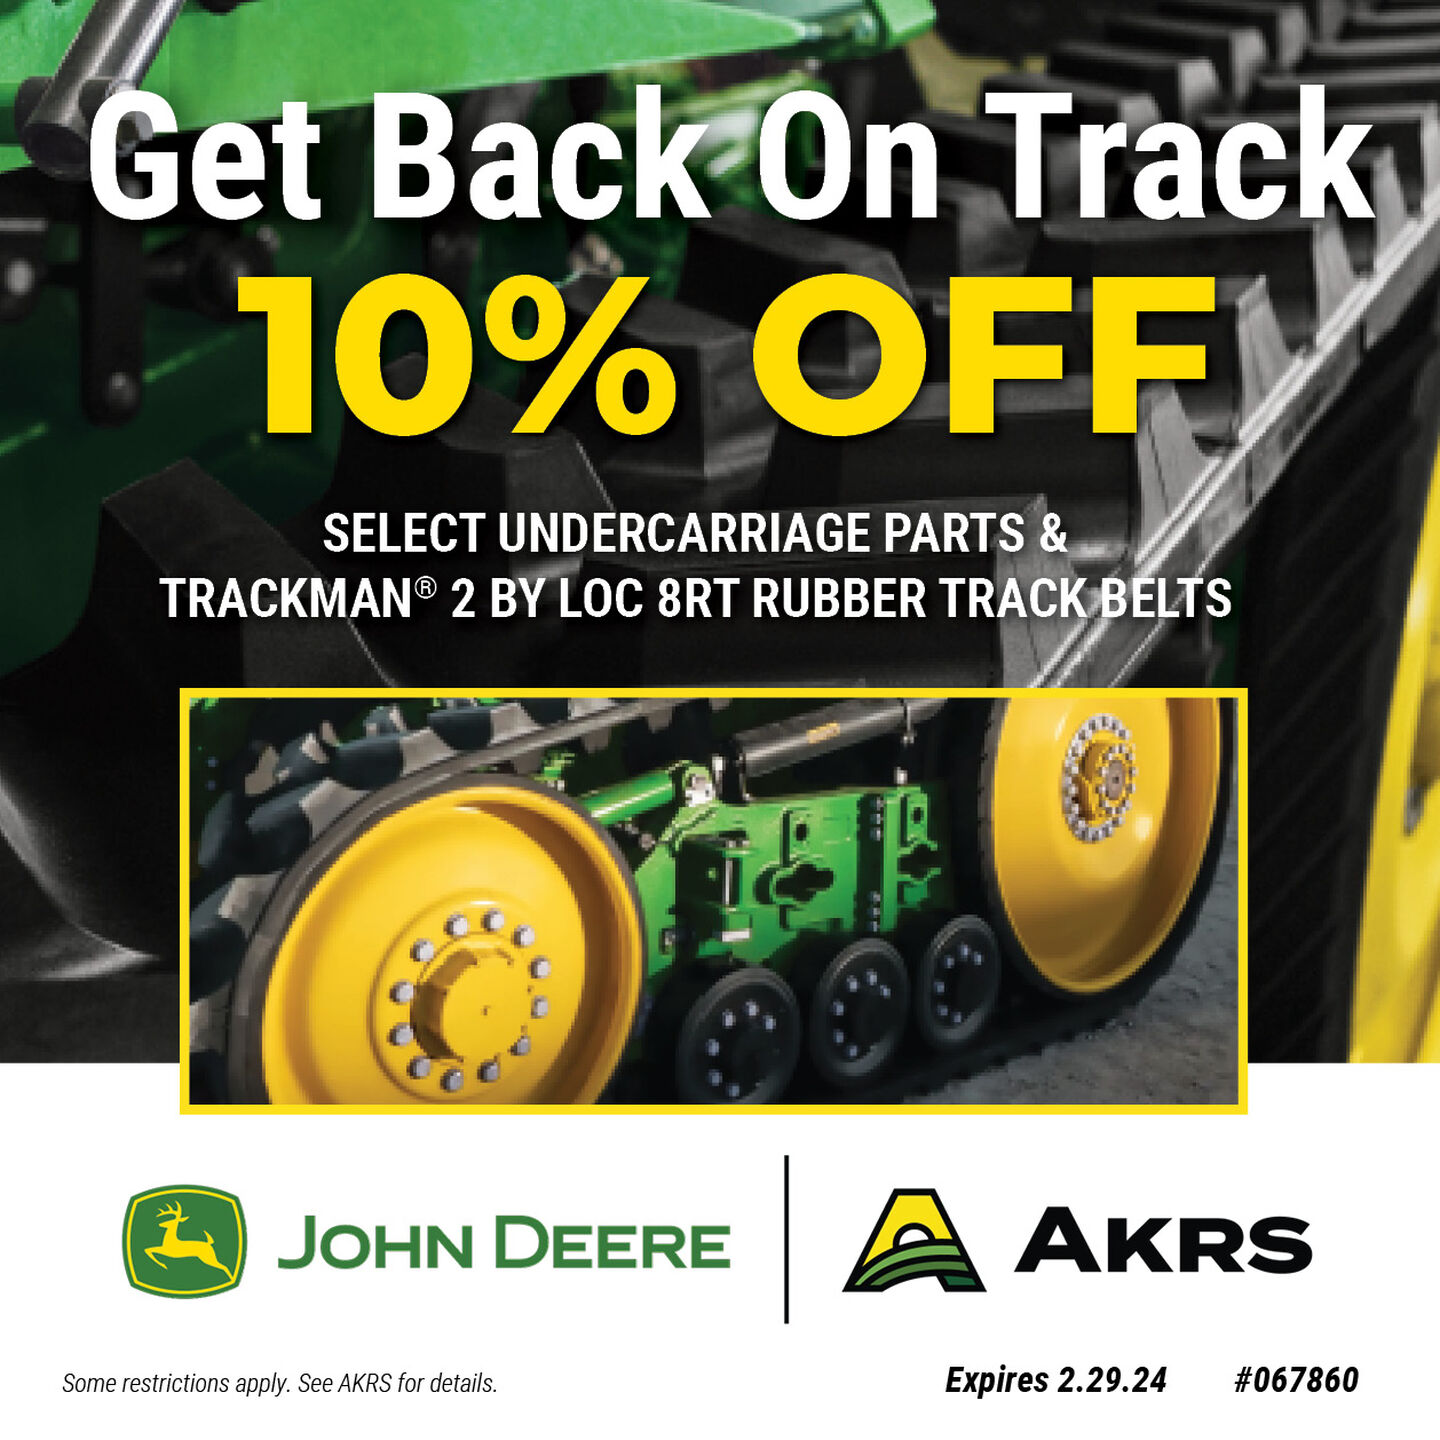 Get Back on Track 10% Off Select Undercarriage Parts & Trackman Rubber Track Belts